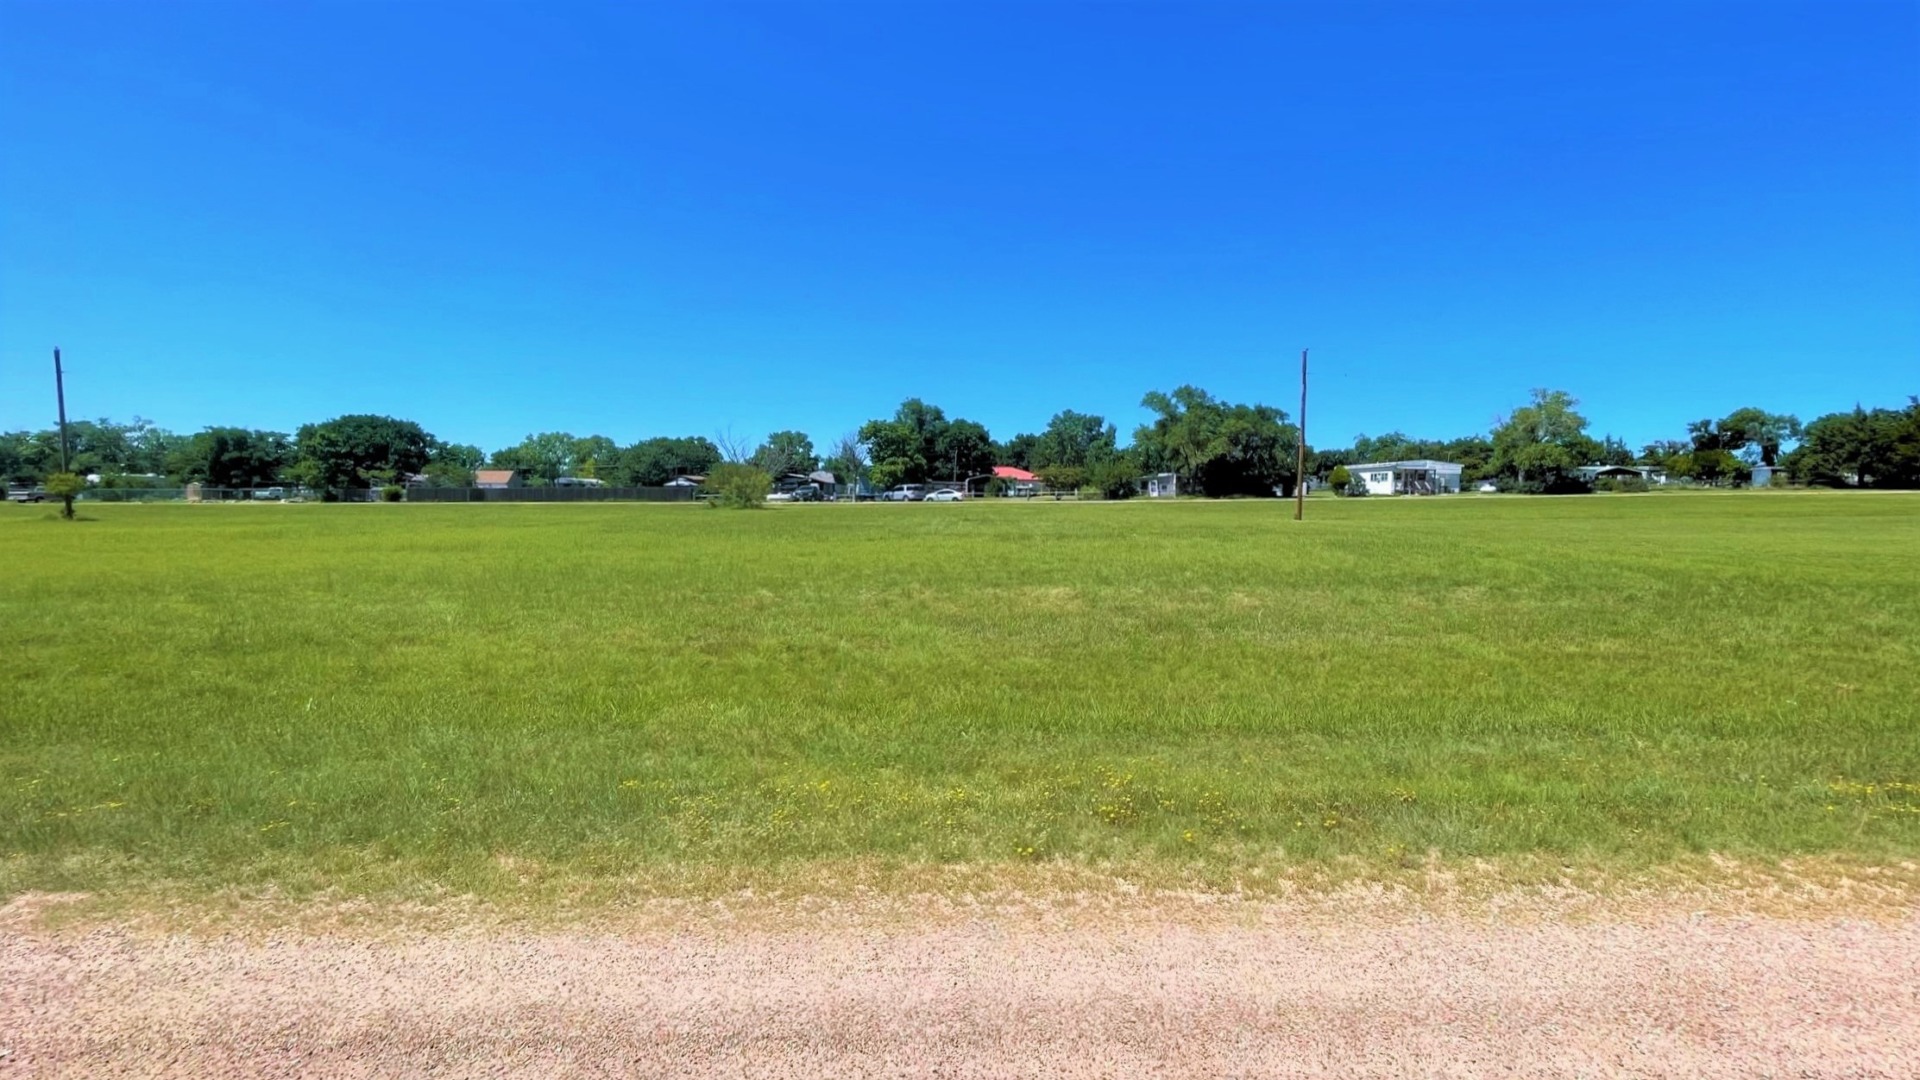 Land for Sale in Donley County 0.23 Acre CLEARED Double Lot with Utilities near Amarillo TX